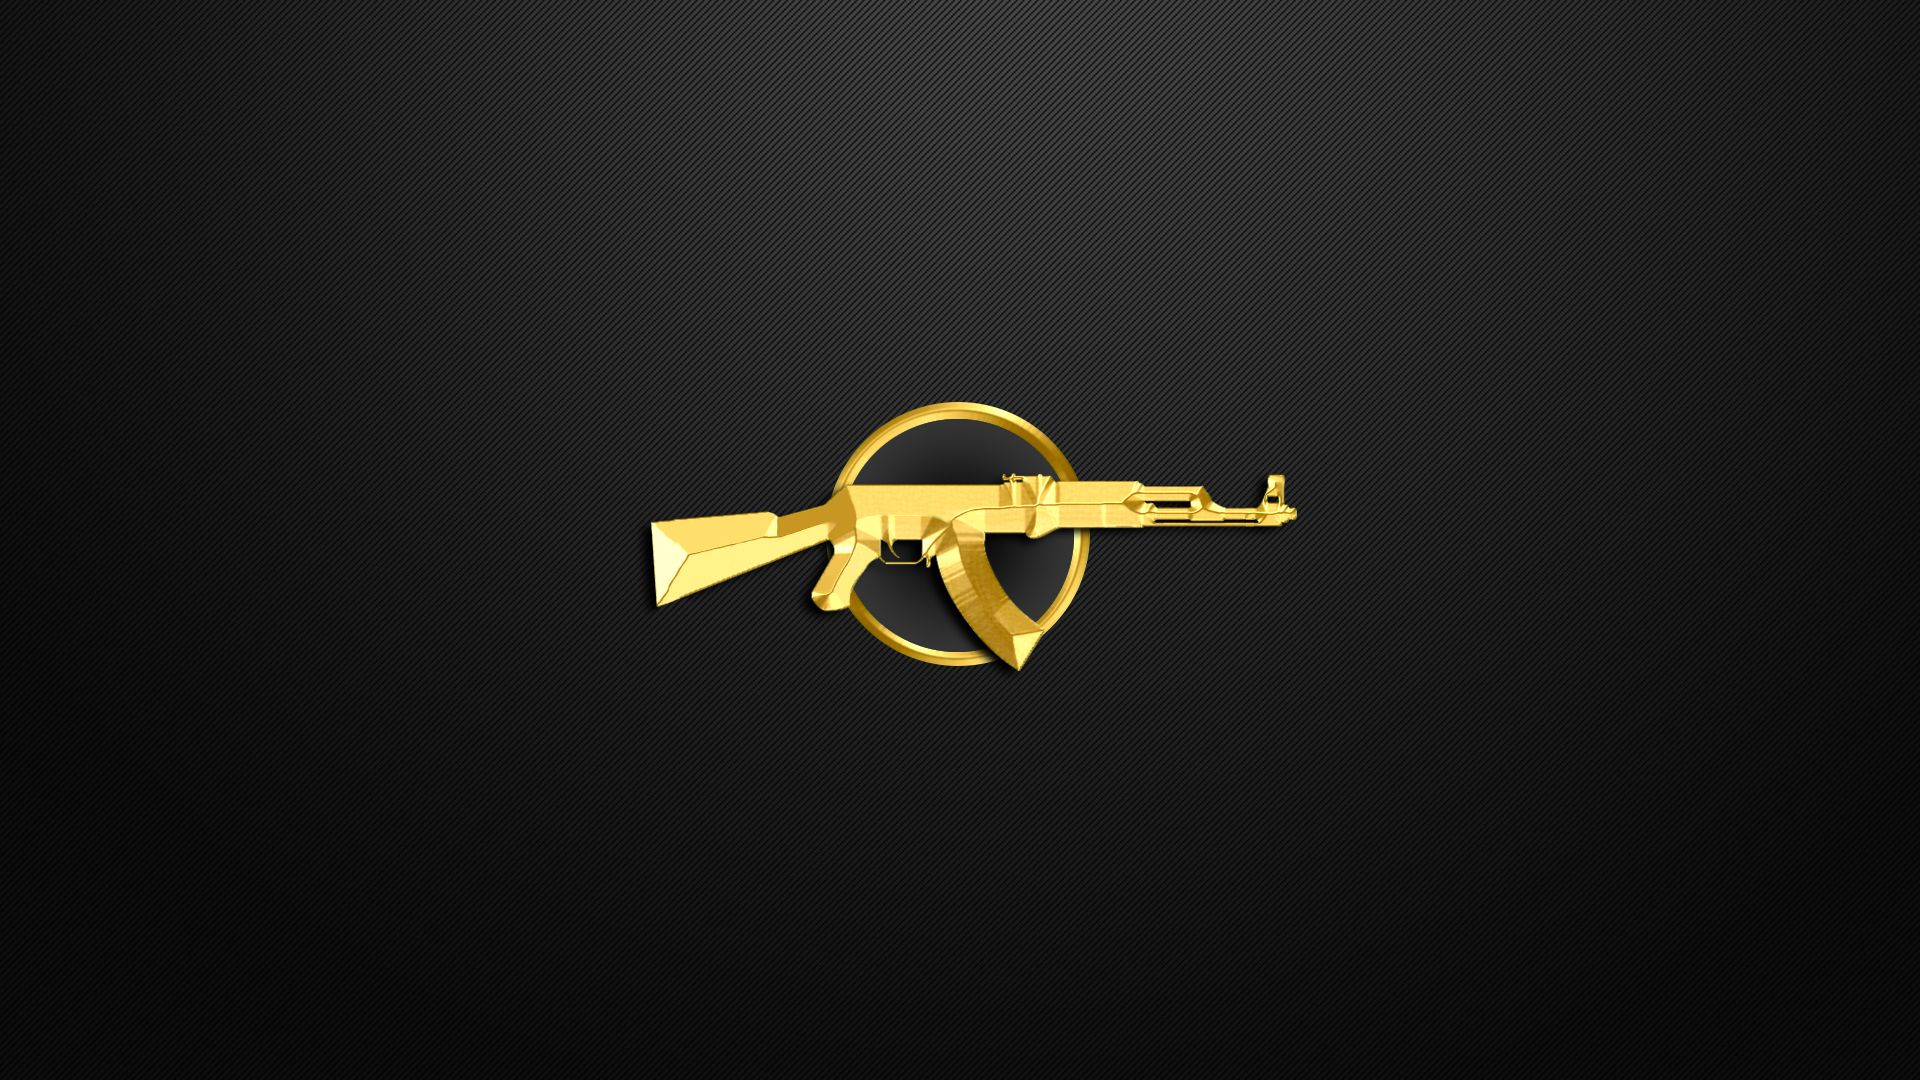 Share Csgo Ranks Wallpaper Gallery To The